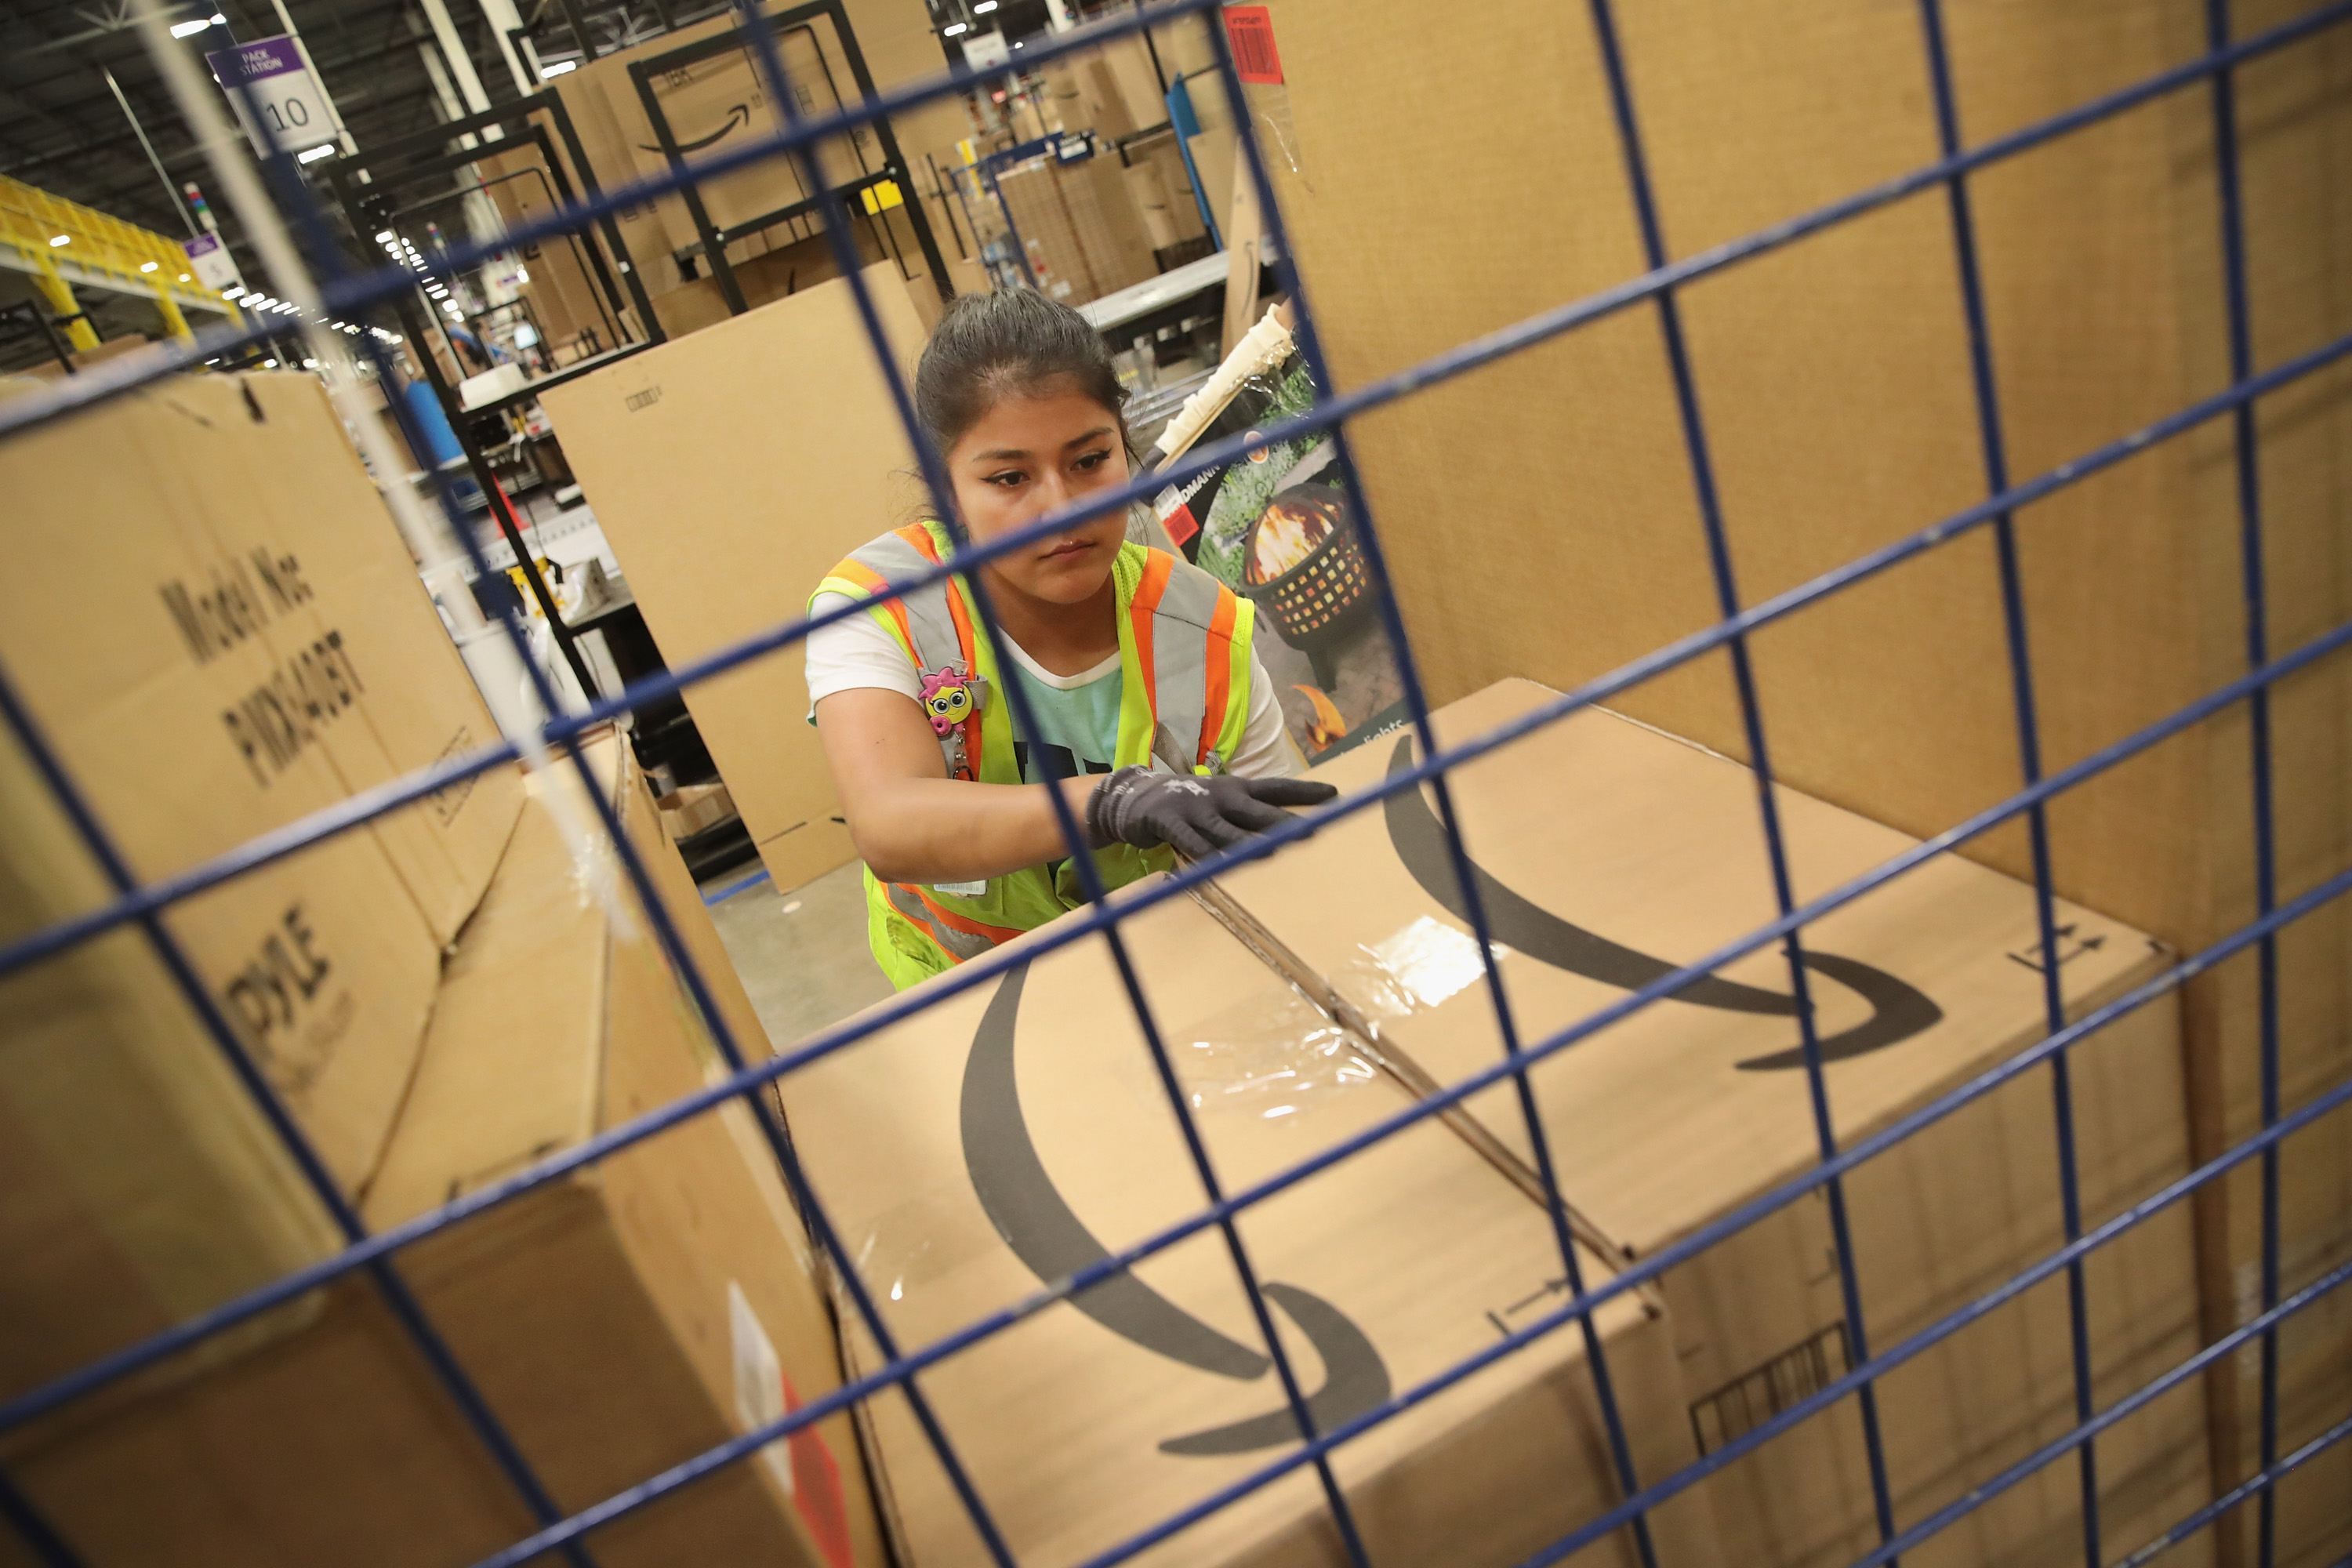 A worker in a safety vest stacks Amazon boxes higher than their head.